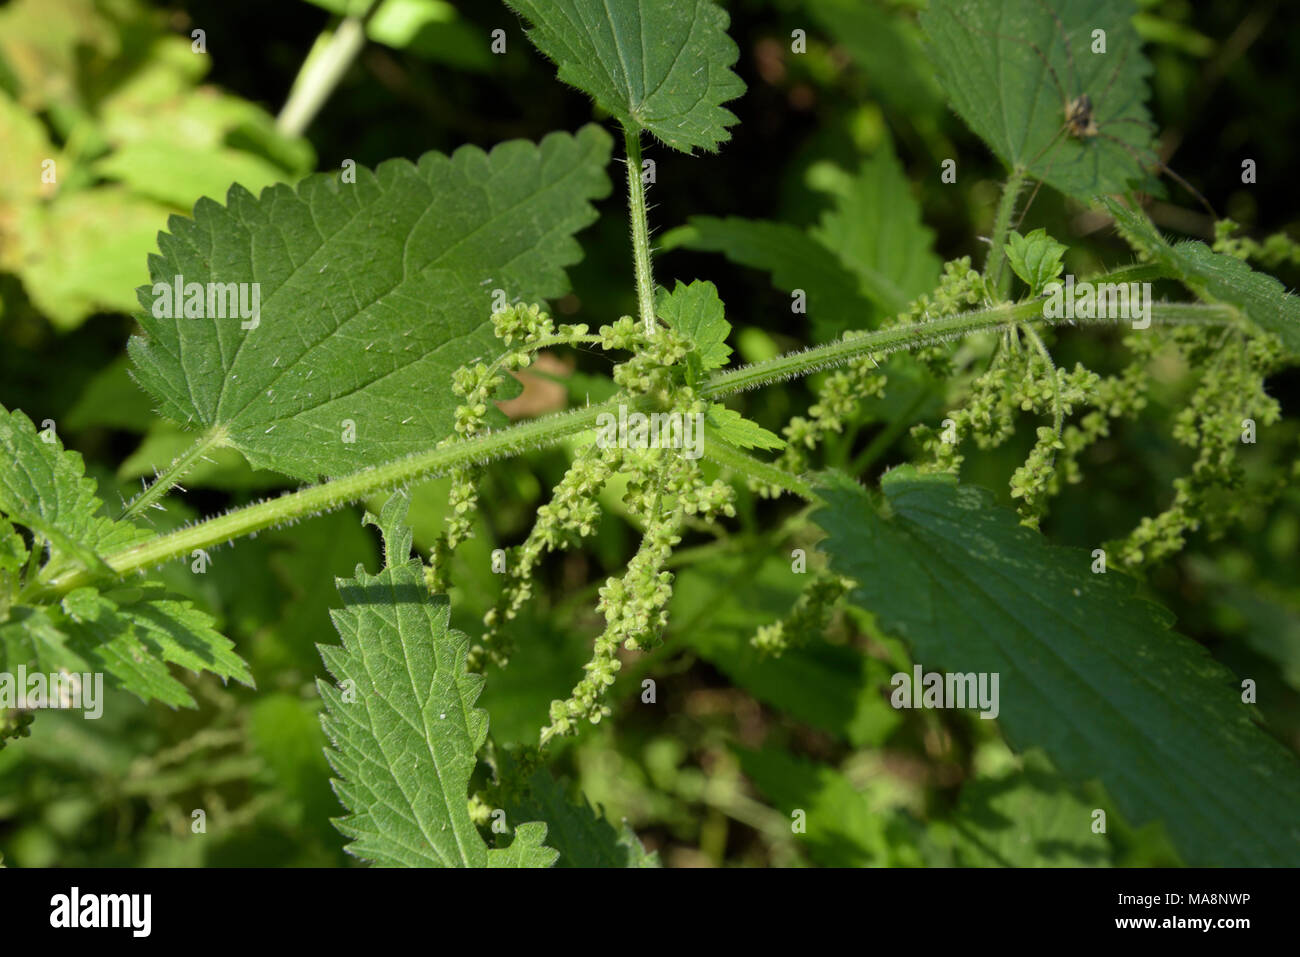 Common Nettle Flowers, Urtica dioica Stock Photo